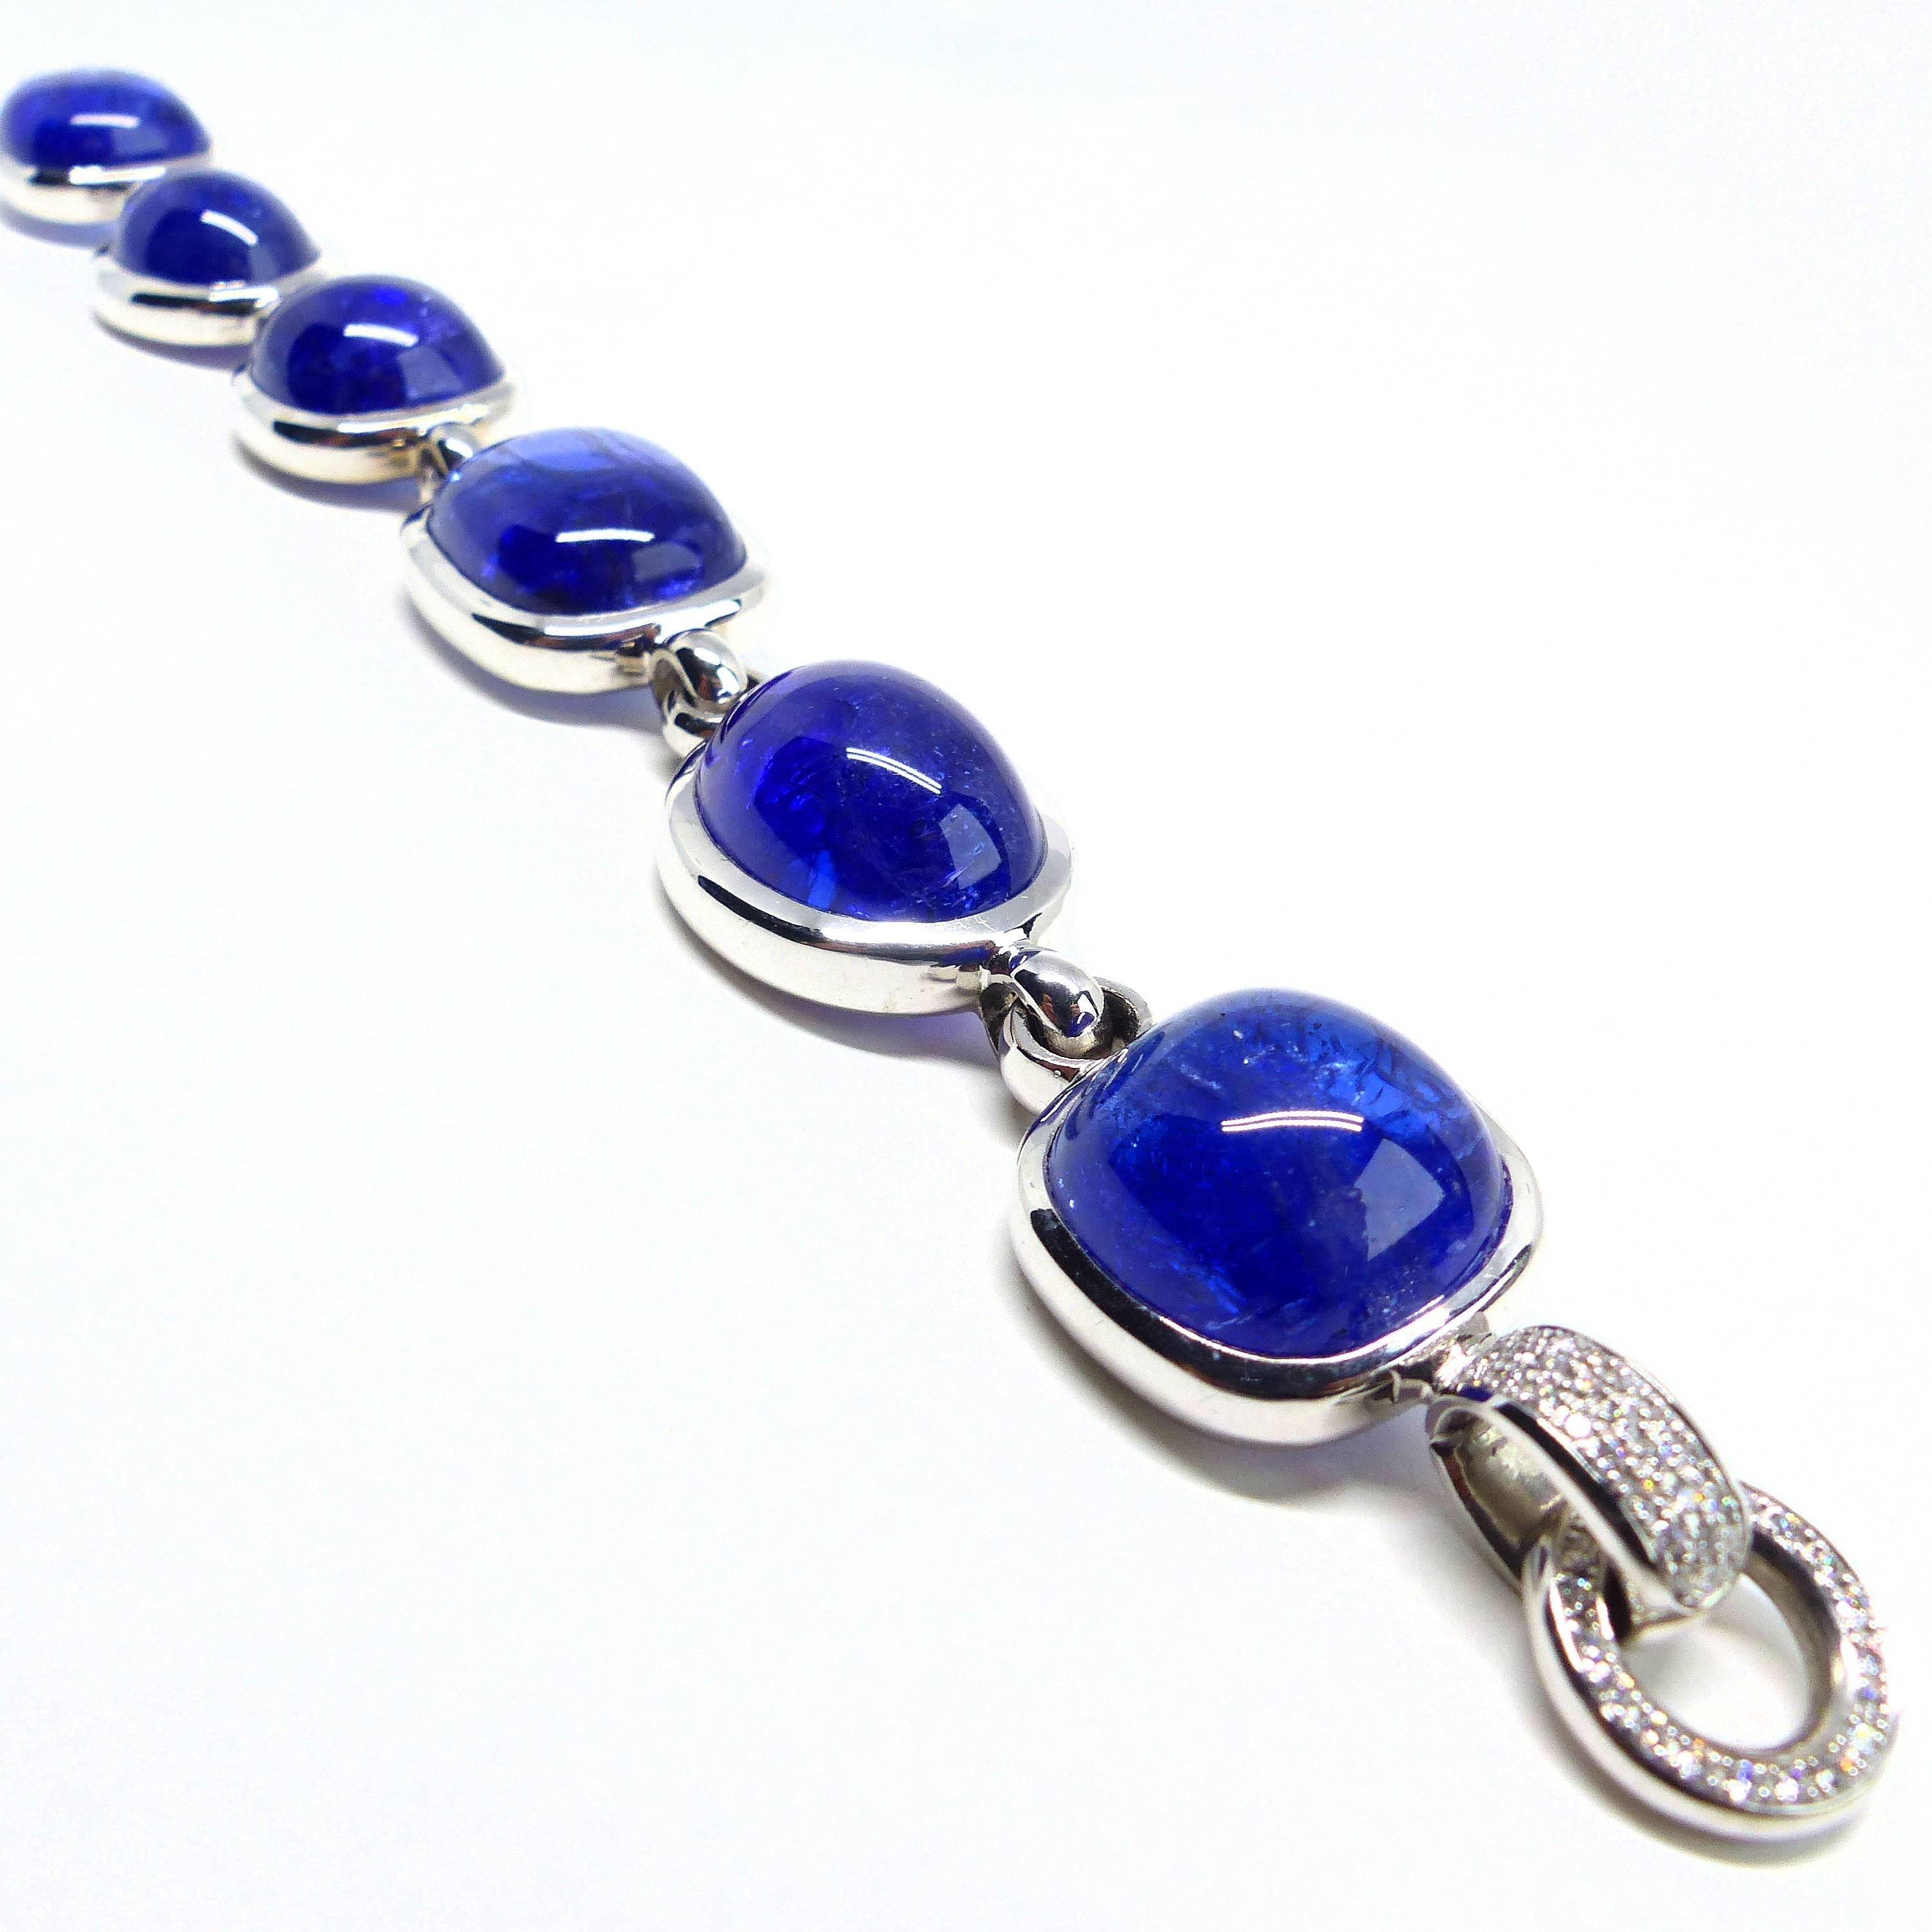 Contemporary Bracelet in White Gold with 6 Tanzanite Cabouchons and Diamonds. For Sale